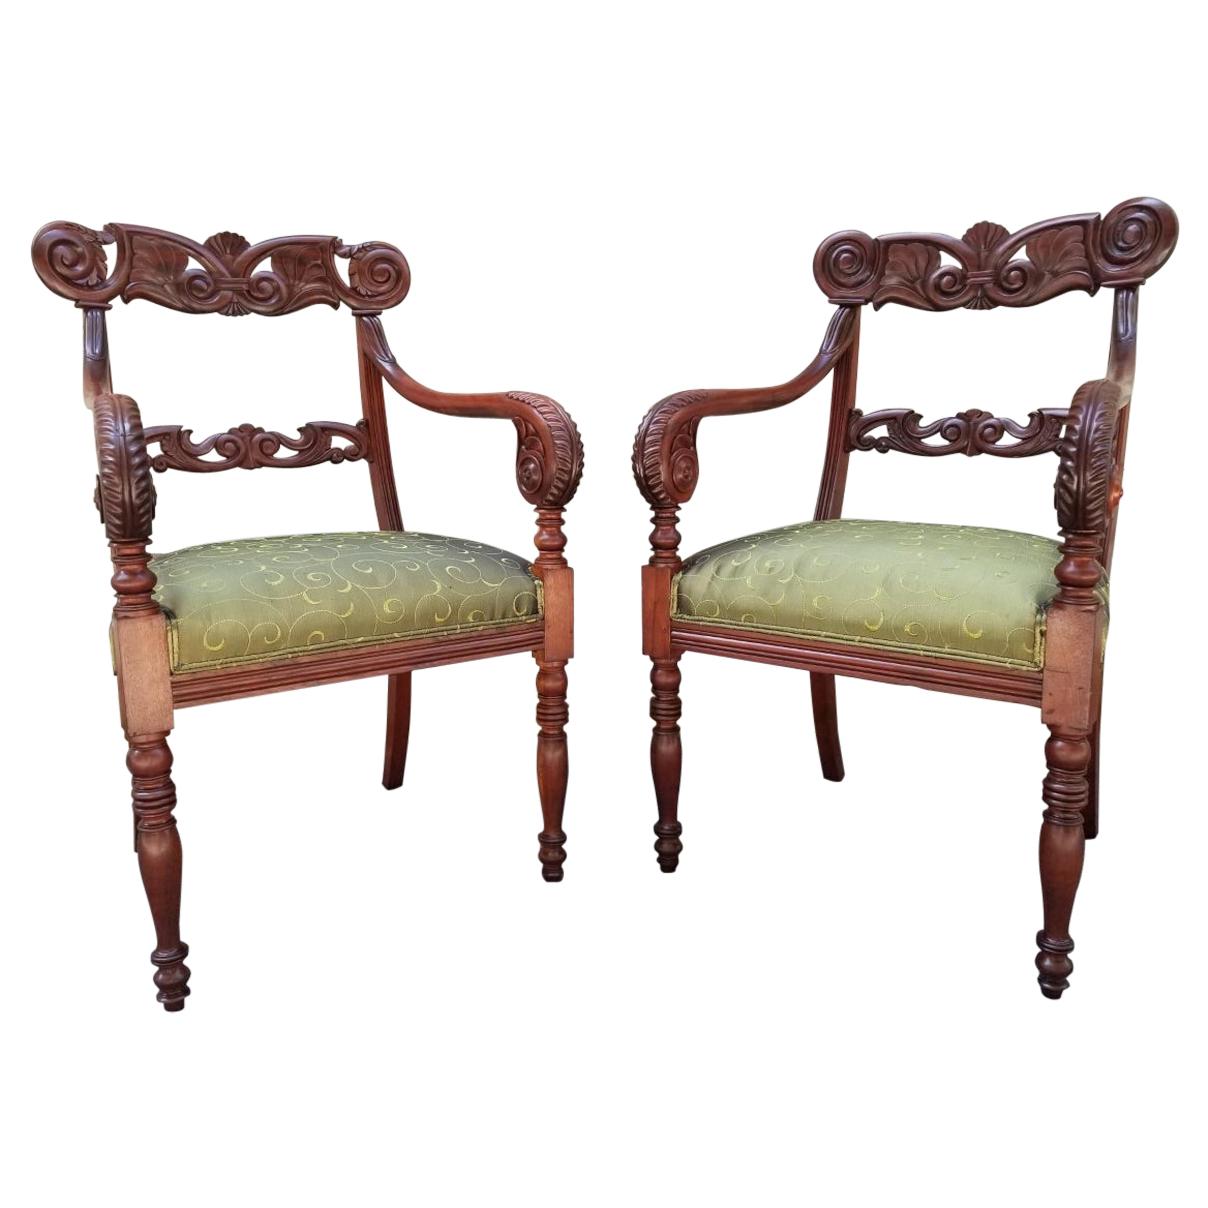 Early 19th Century Pair of Caribbean, West Indies Regency Chairs at 1stDibs  | west indies furniture, antique caribbean furniture, caribbean chairs